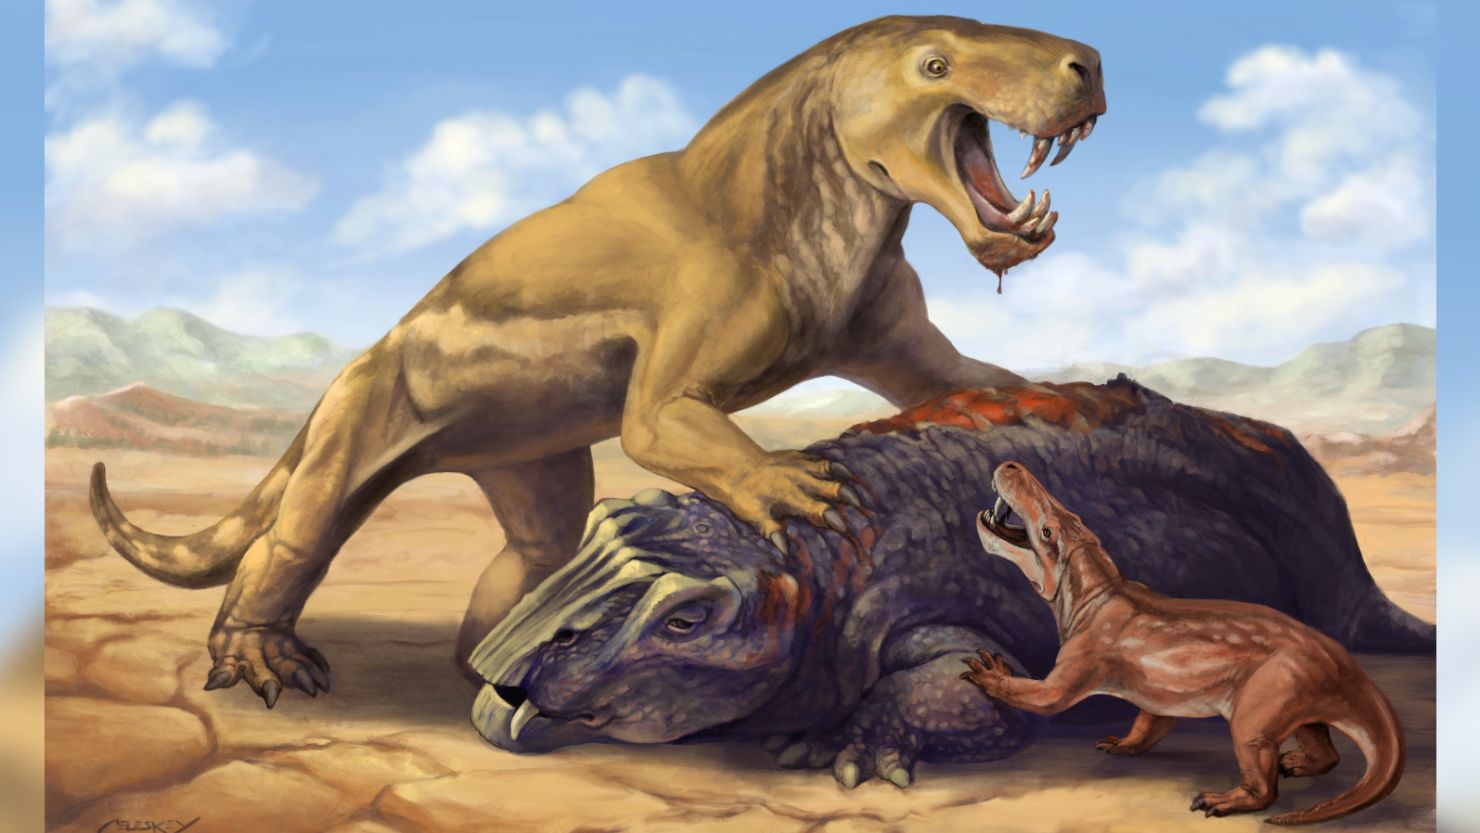 An artist's illustration depicts Inostrancevia with its dicynodont prey while scaring off a much smaller African Inostrancevia species.